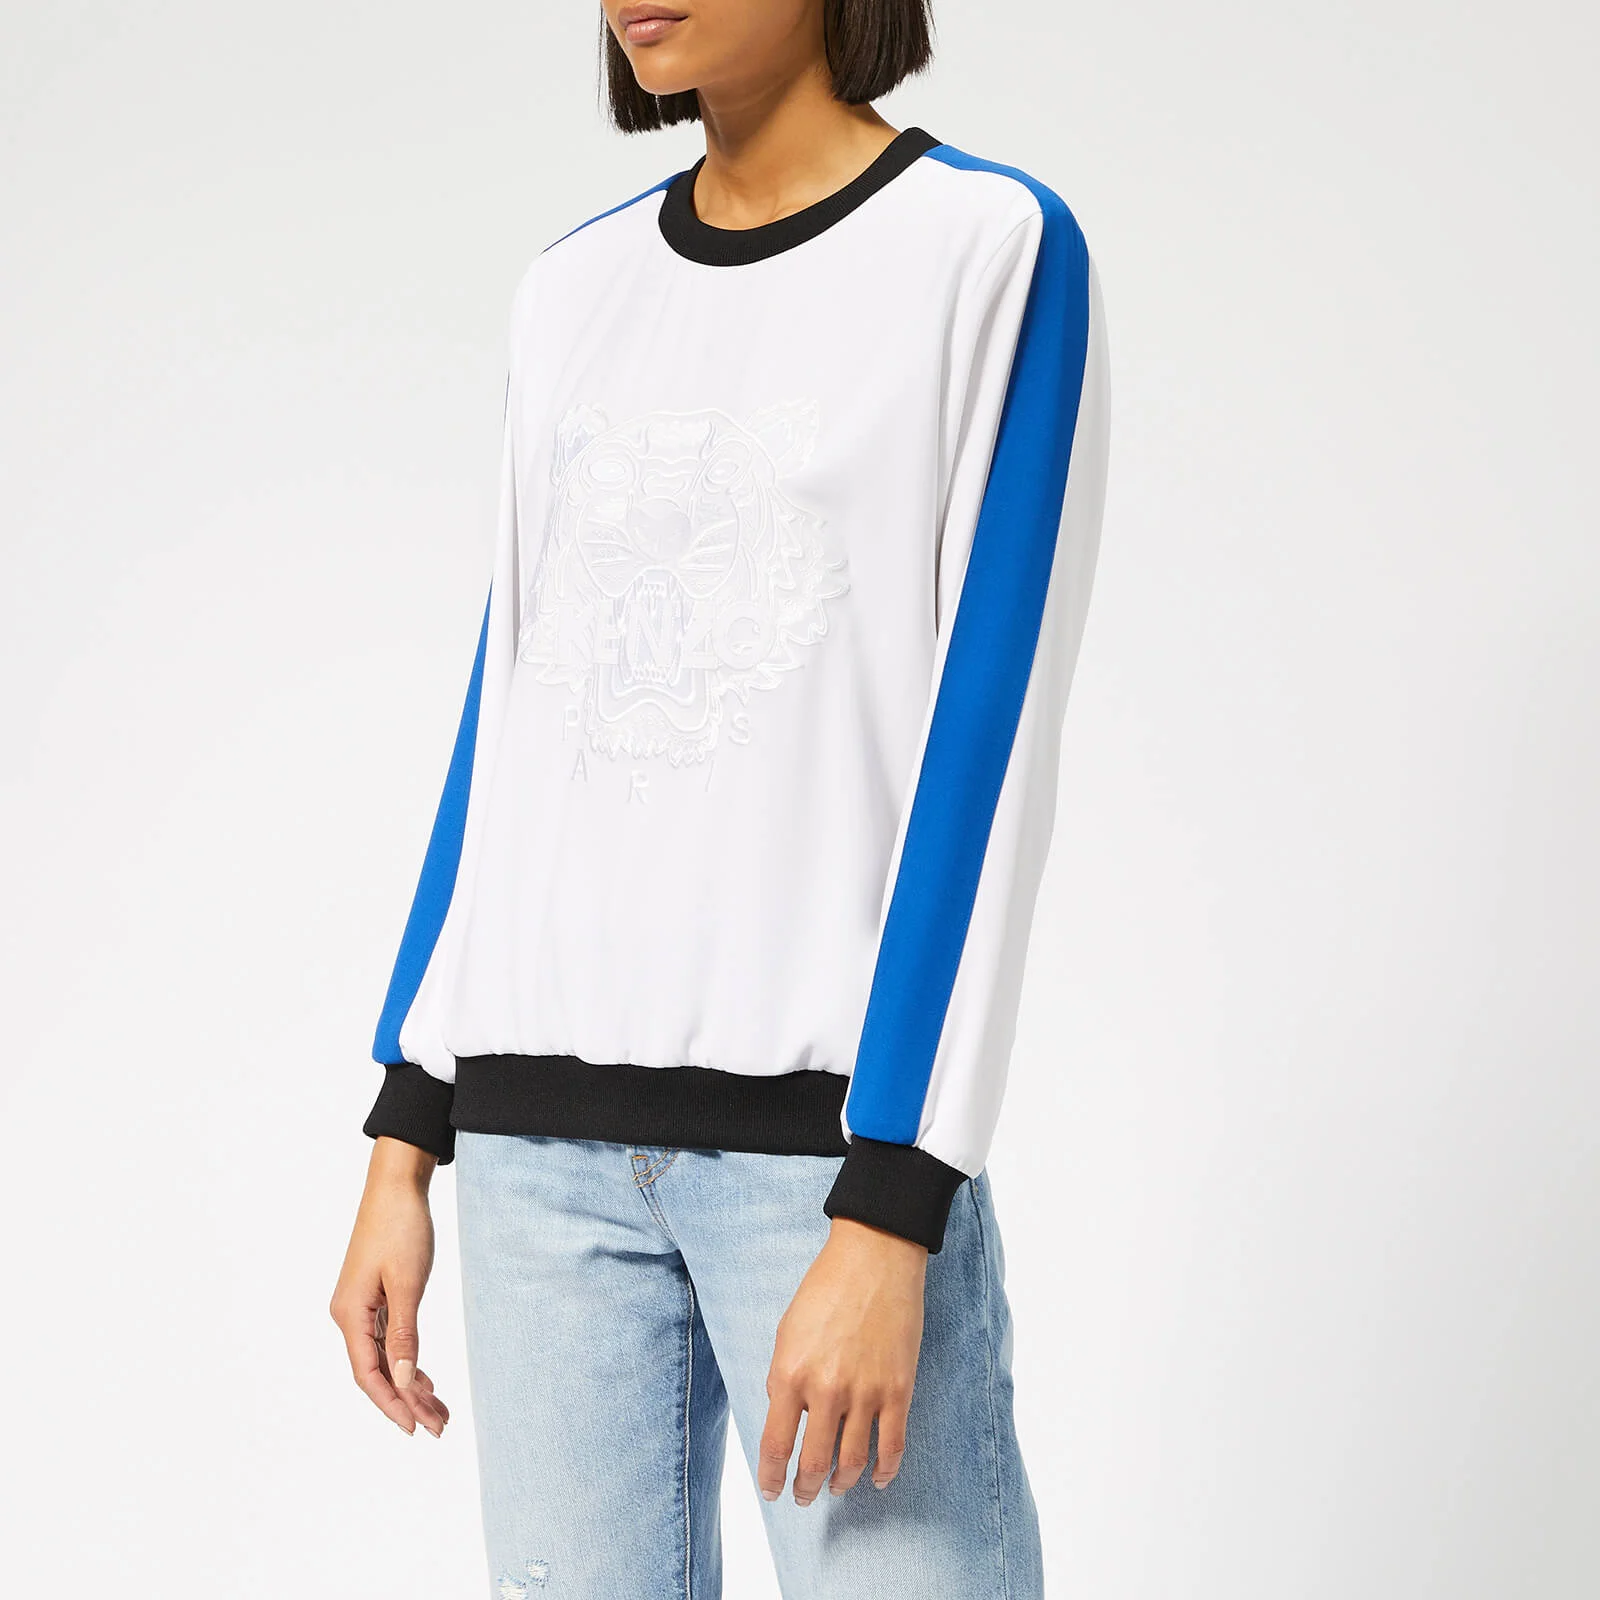 KENZO Women's Soft Sweater Tiger Embroidery - White Image 1